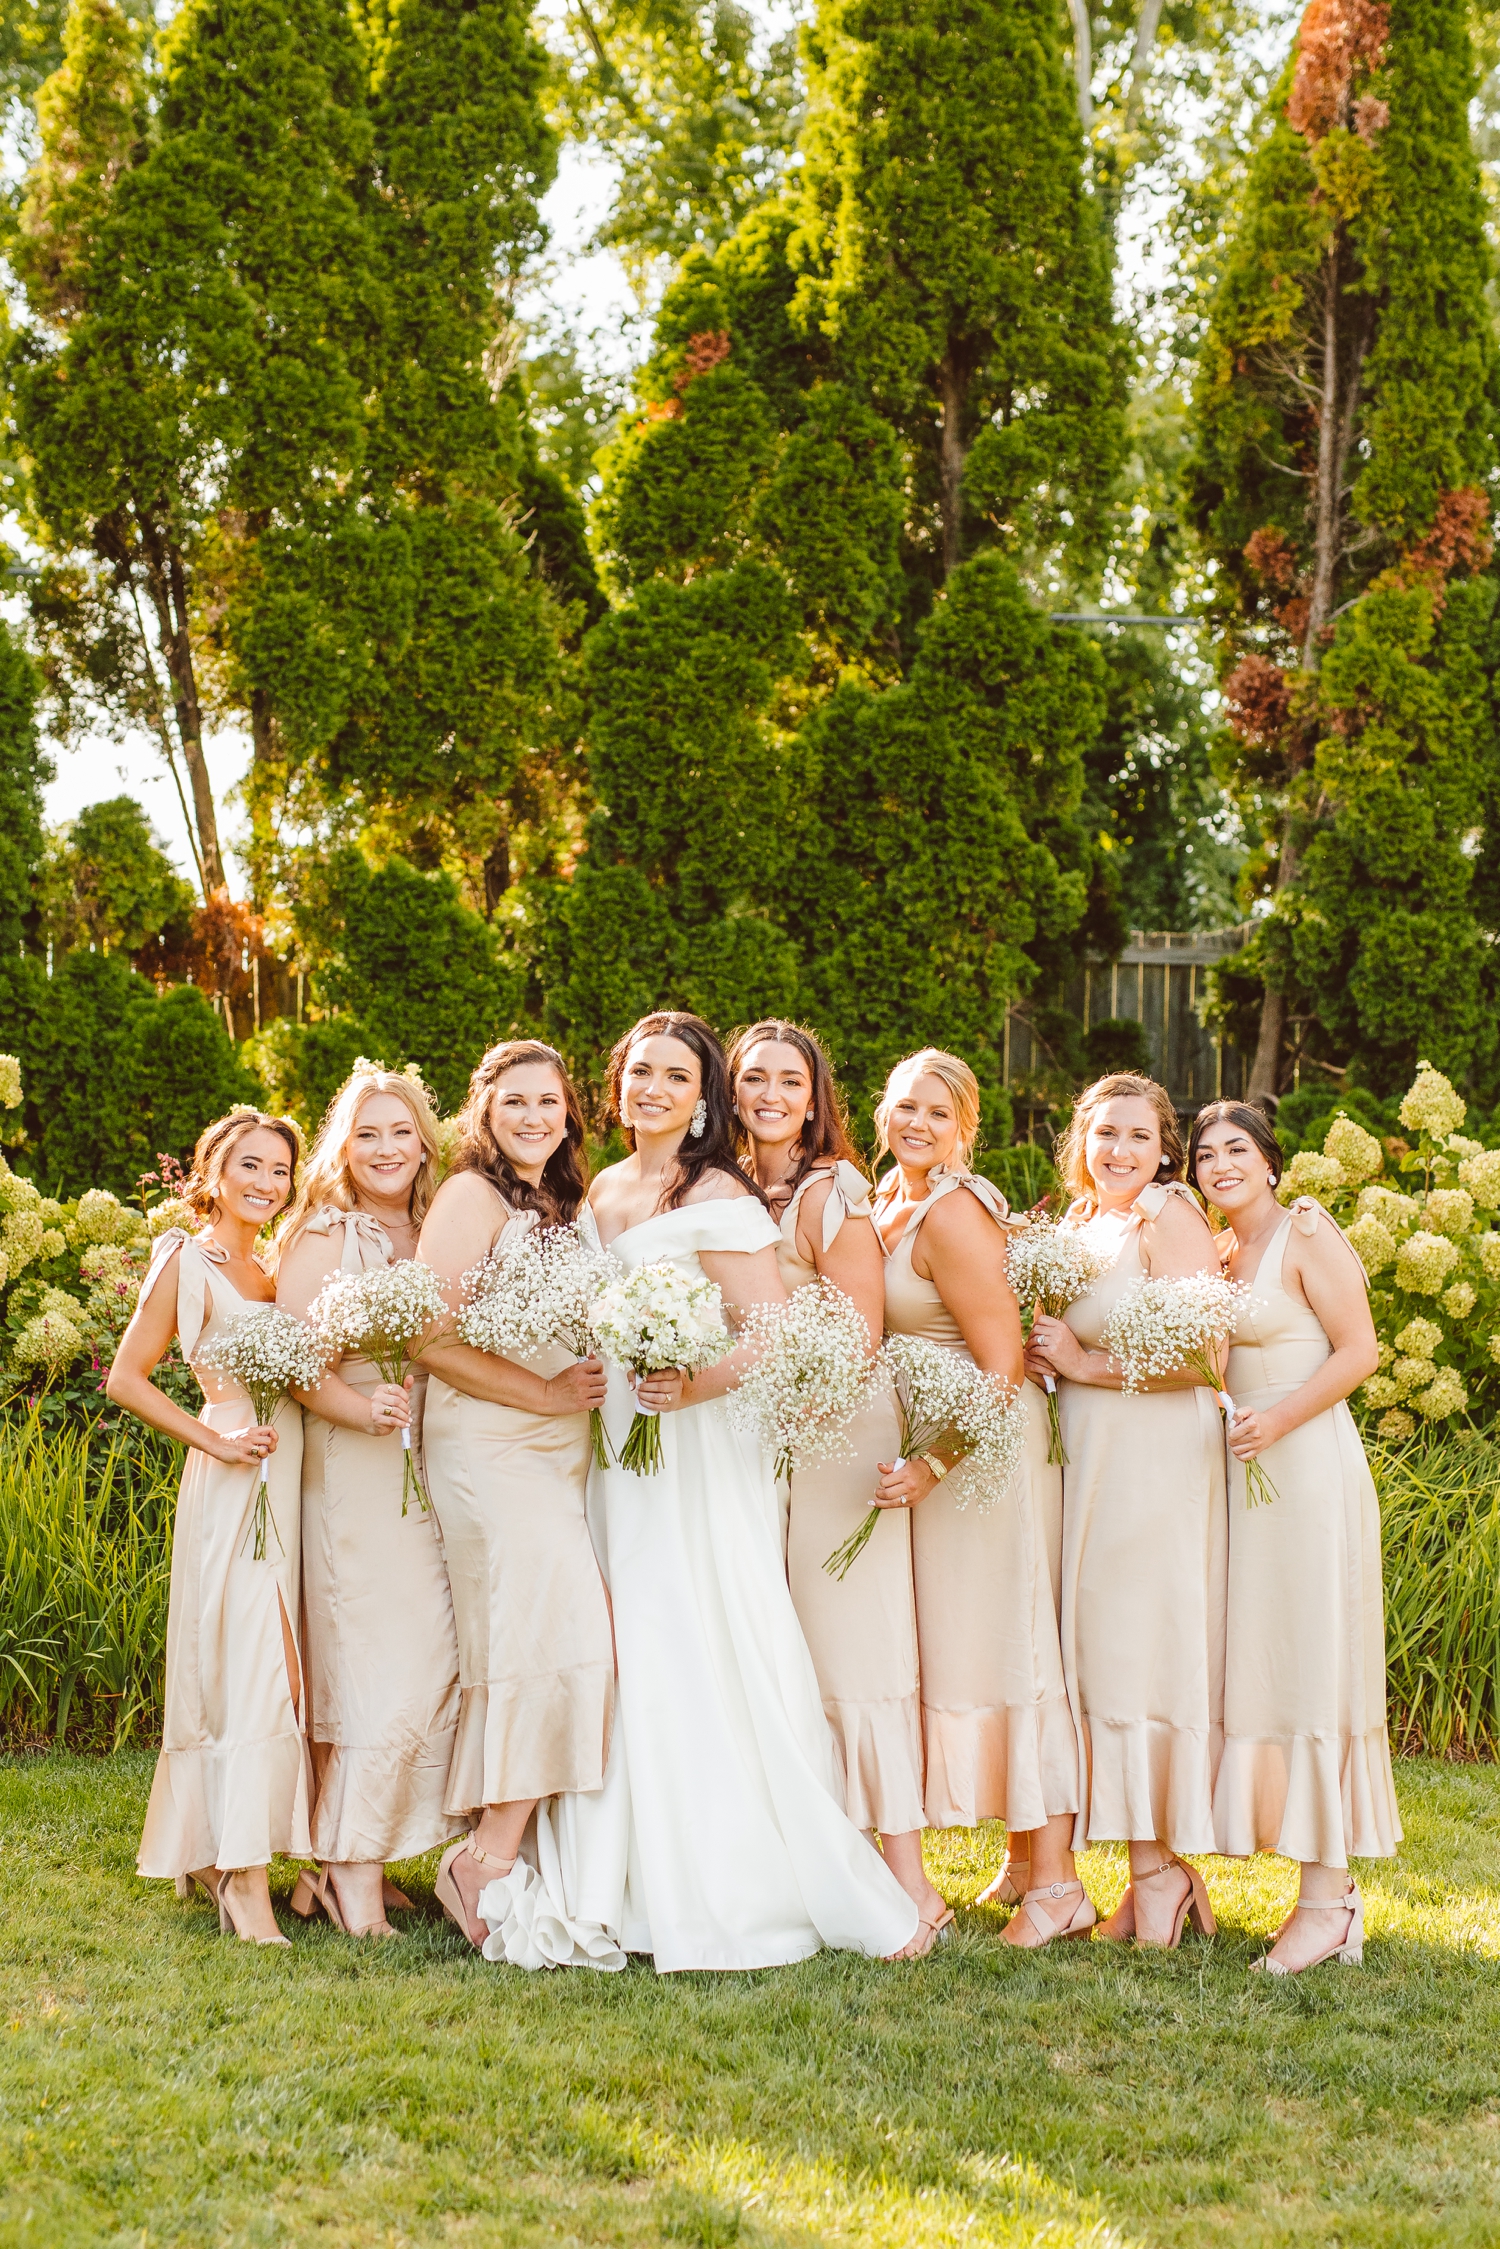 Bride with bridesmaids in champagne colored dresses at Ladew Topiary Gardens | Brooke Michelle Photo